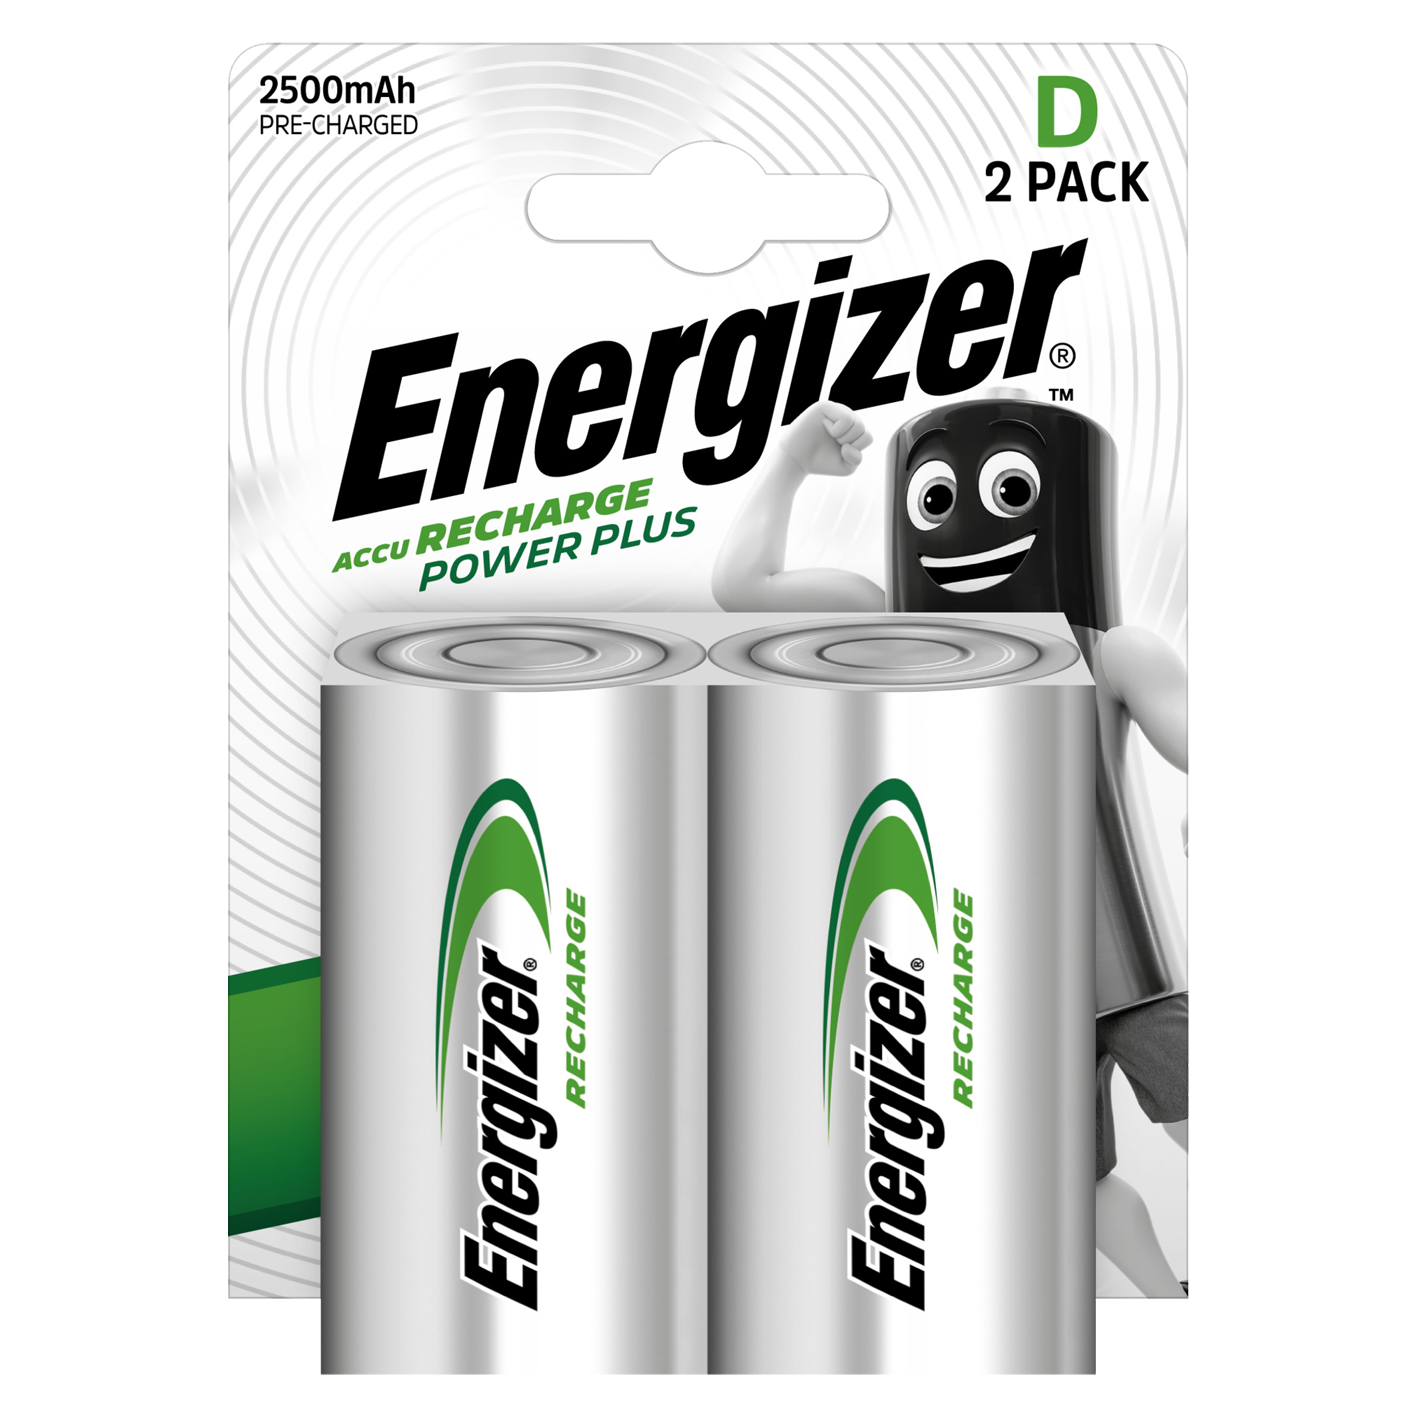 Energizer® D Size 2500mAh Recharge Power Plus, Pack of 2